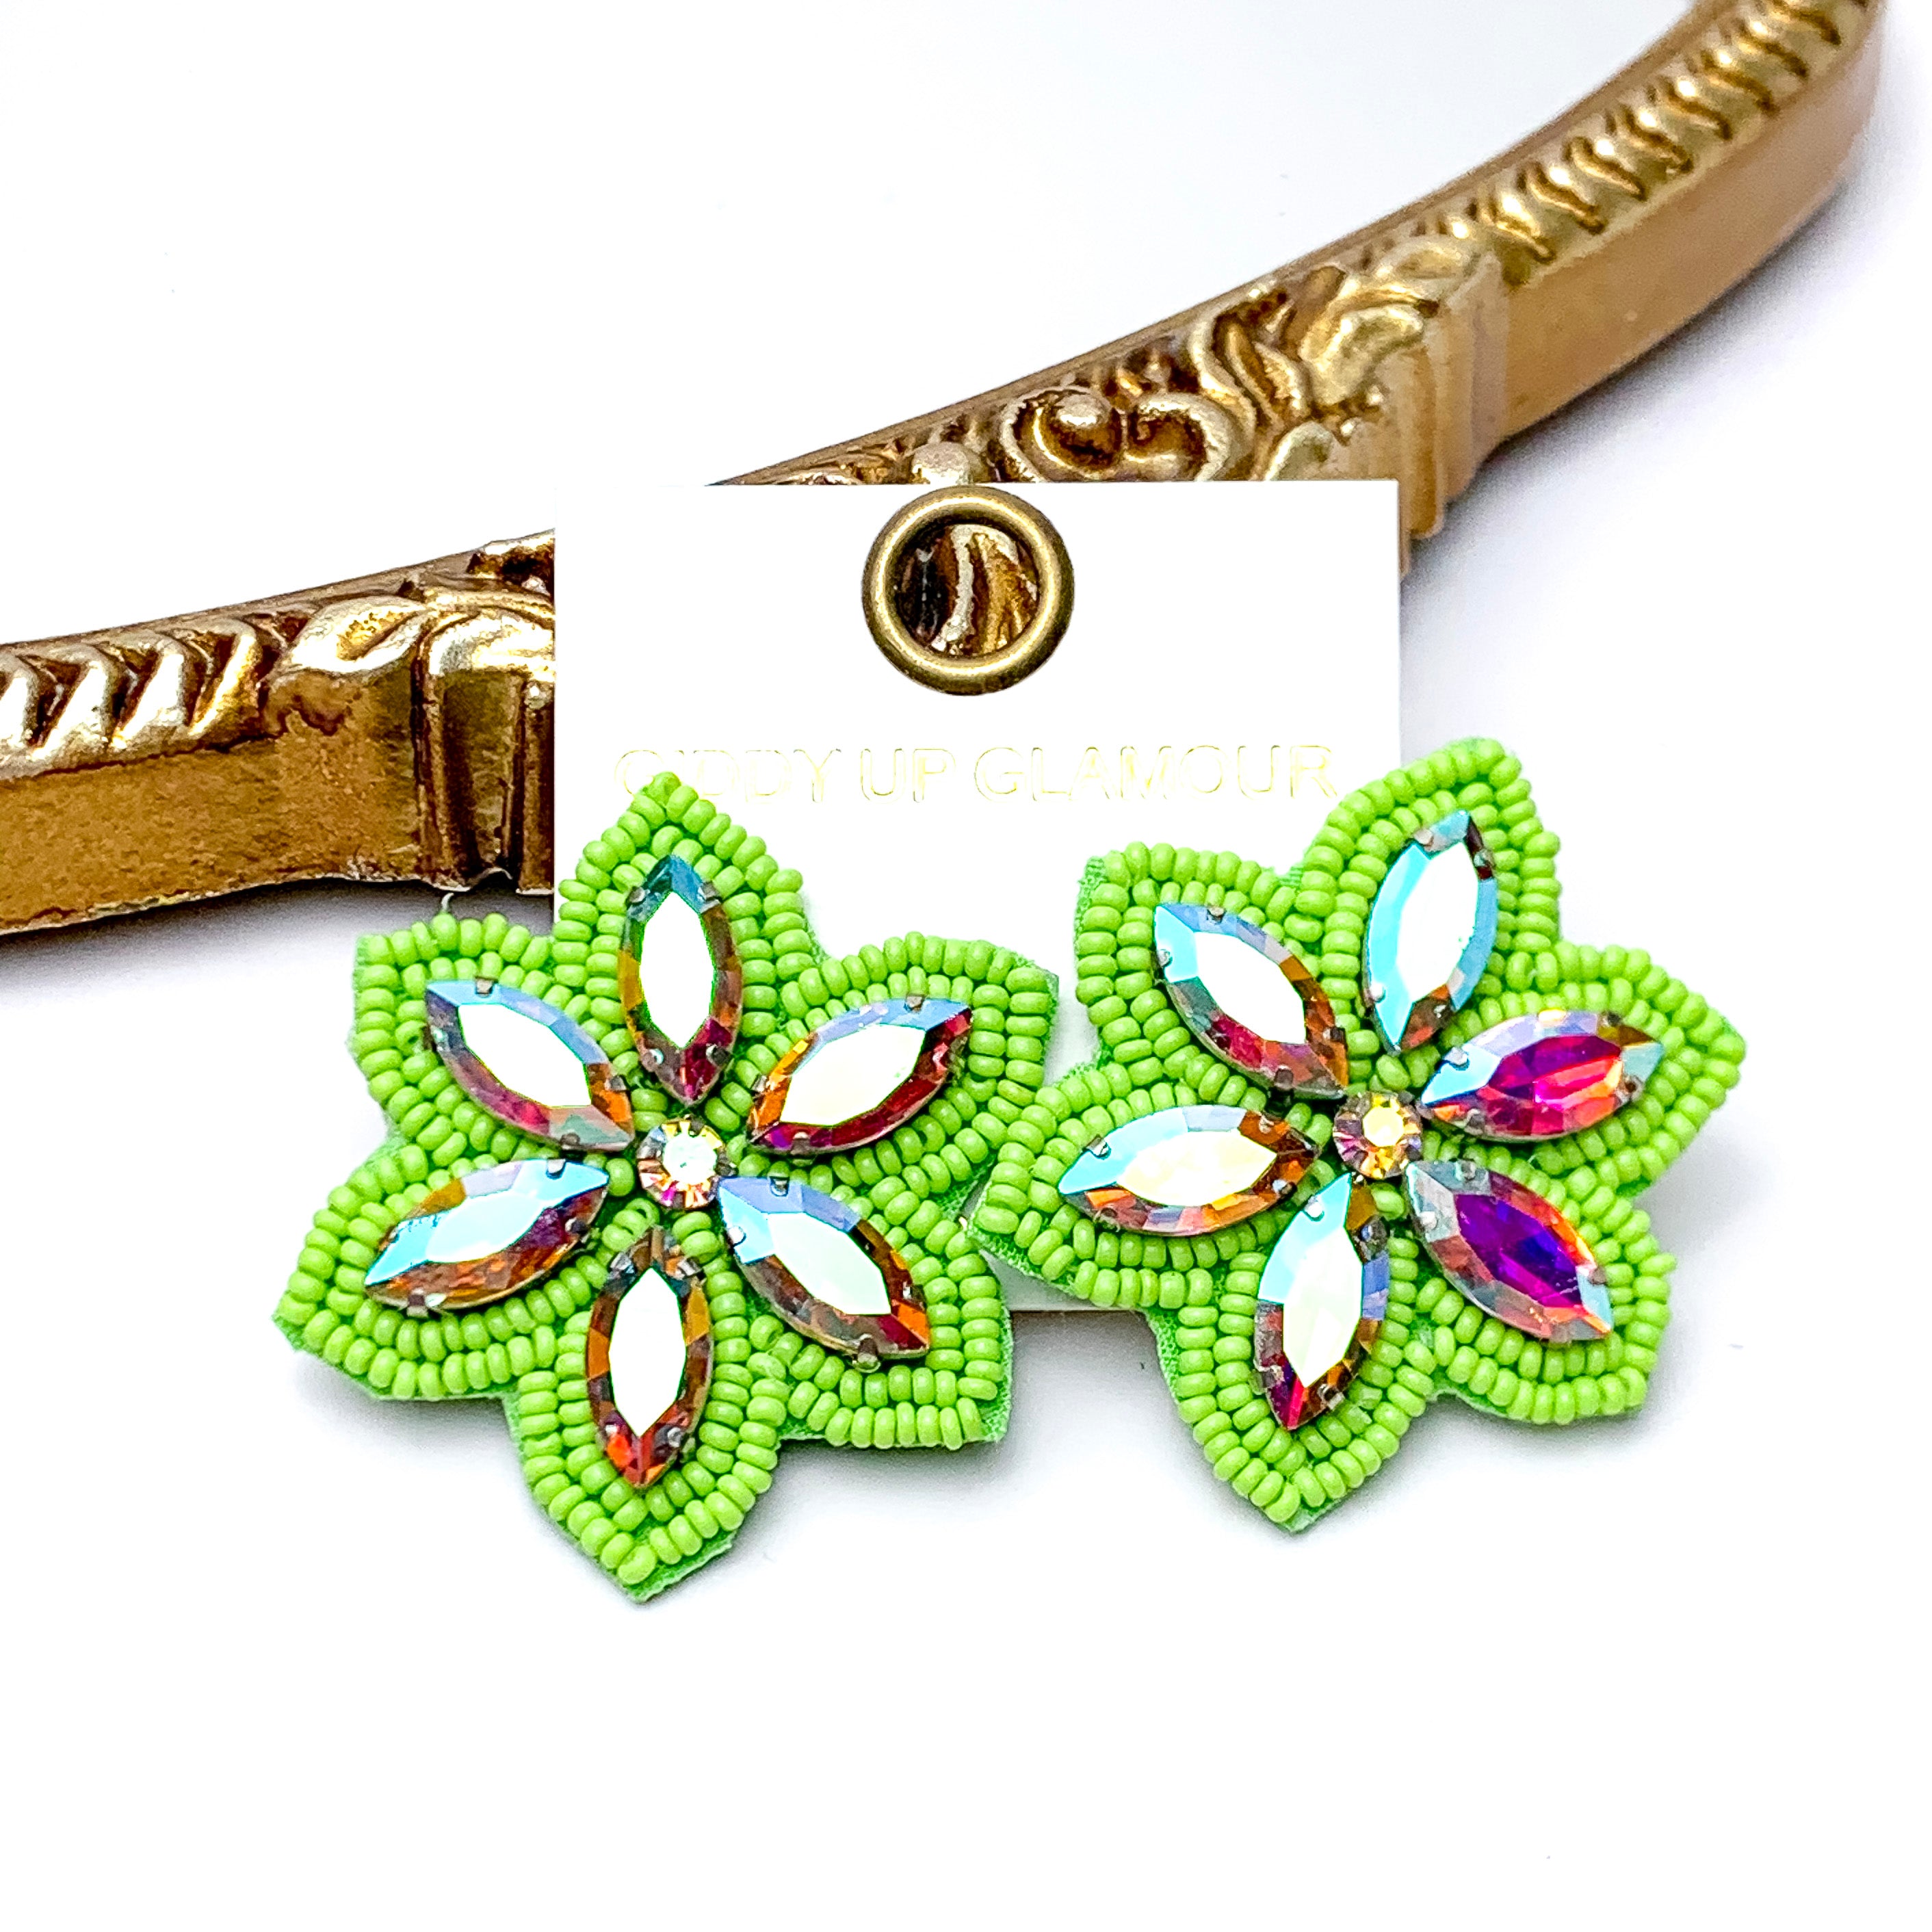 Prismatic Petals Seed Bead Flower Stud Earrings with AB stones in Lime Green